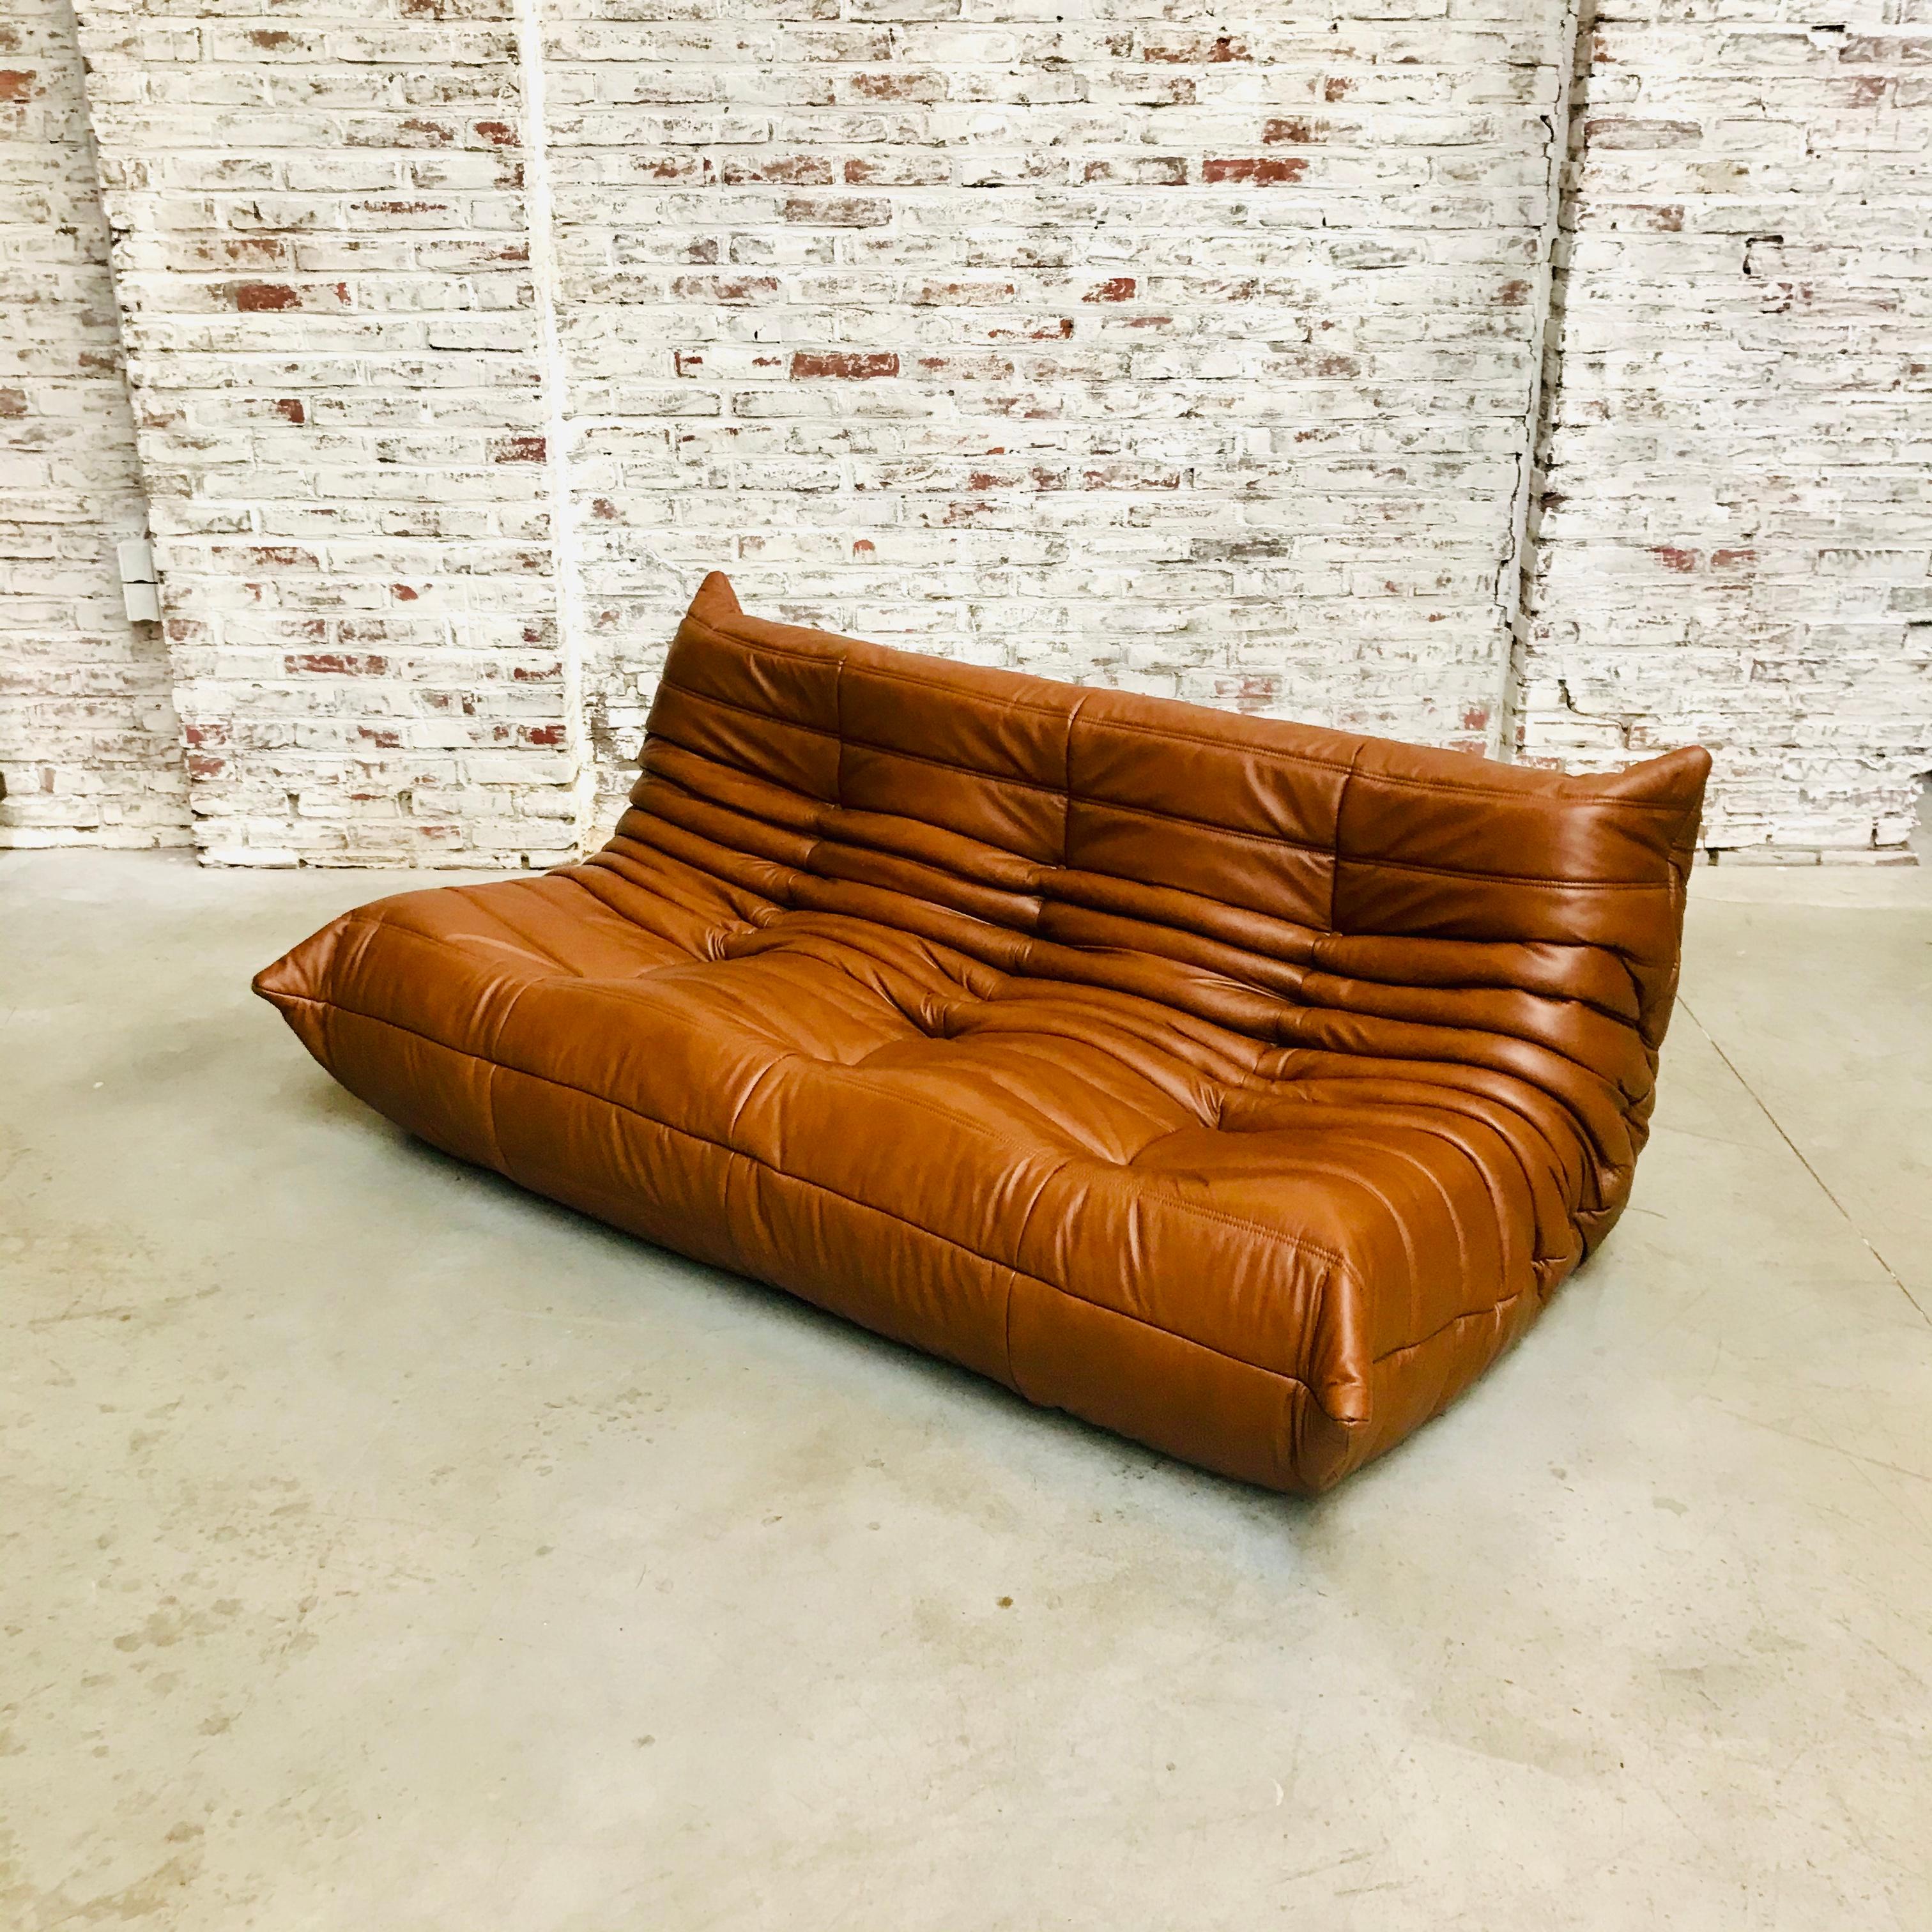 The togo was designed by Michel Ducaroy in 1973 but is still very popular today. It has been renovated. This means that the old weak parts of foam have been replaced by new parts of firm foam. Thereafter, the sofa is upholstered in good quality